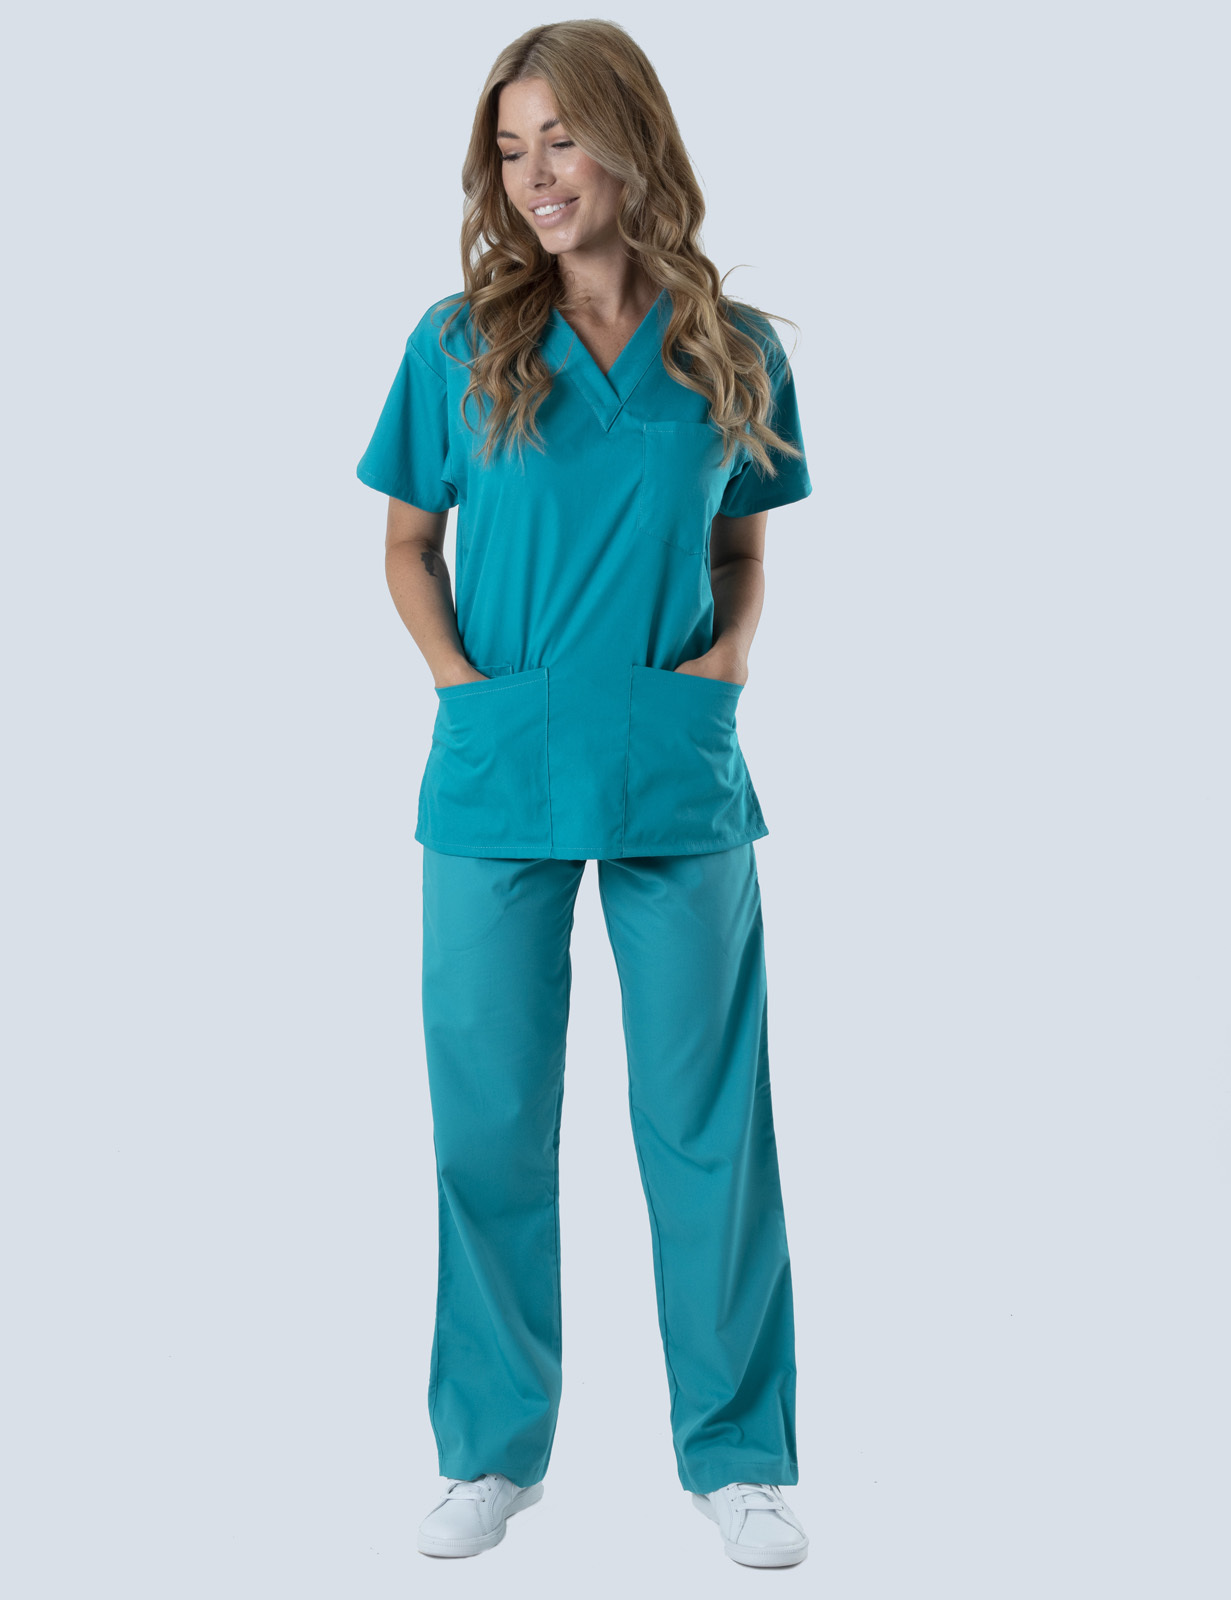 Gympie Hospital - AIN (4 Pocket Scrub Top and Cargo Pants in Teal incl Logos)